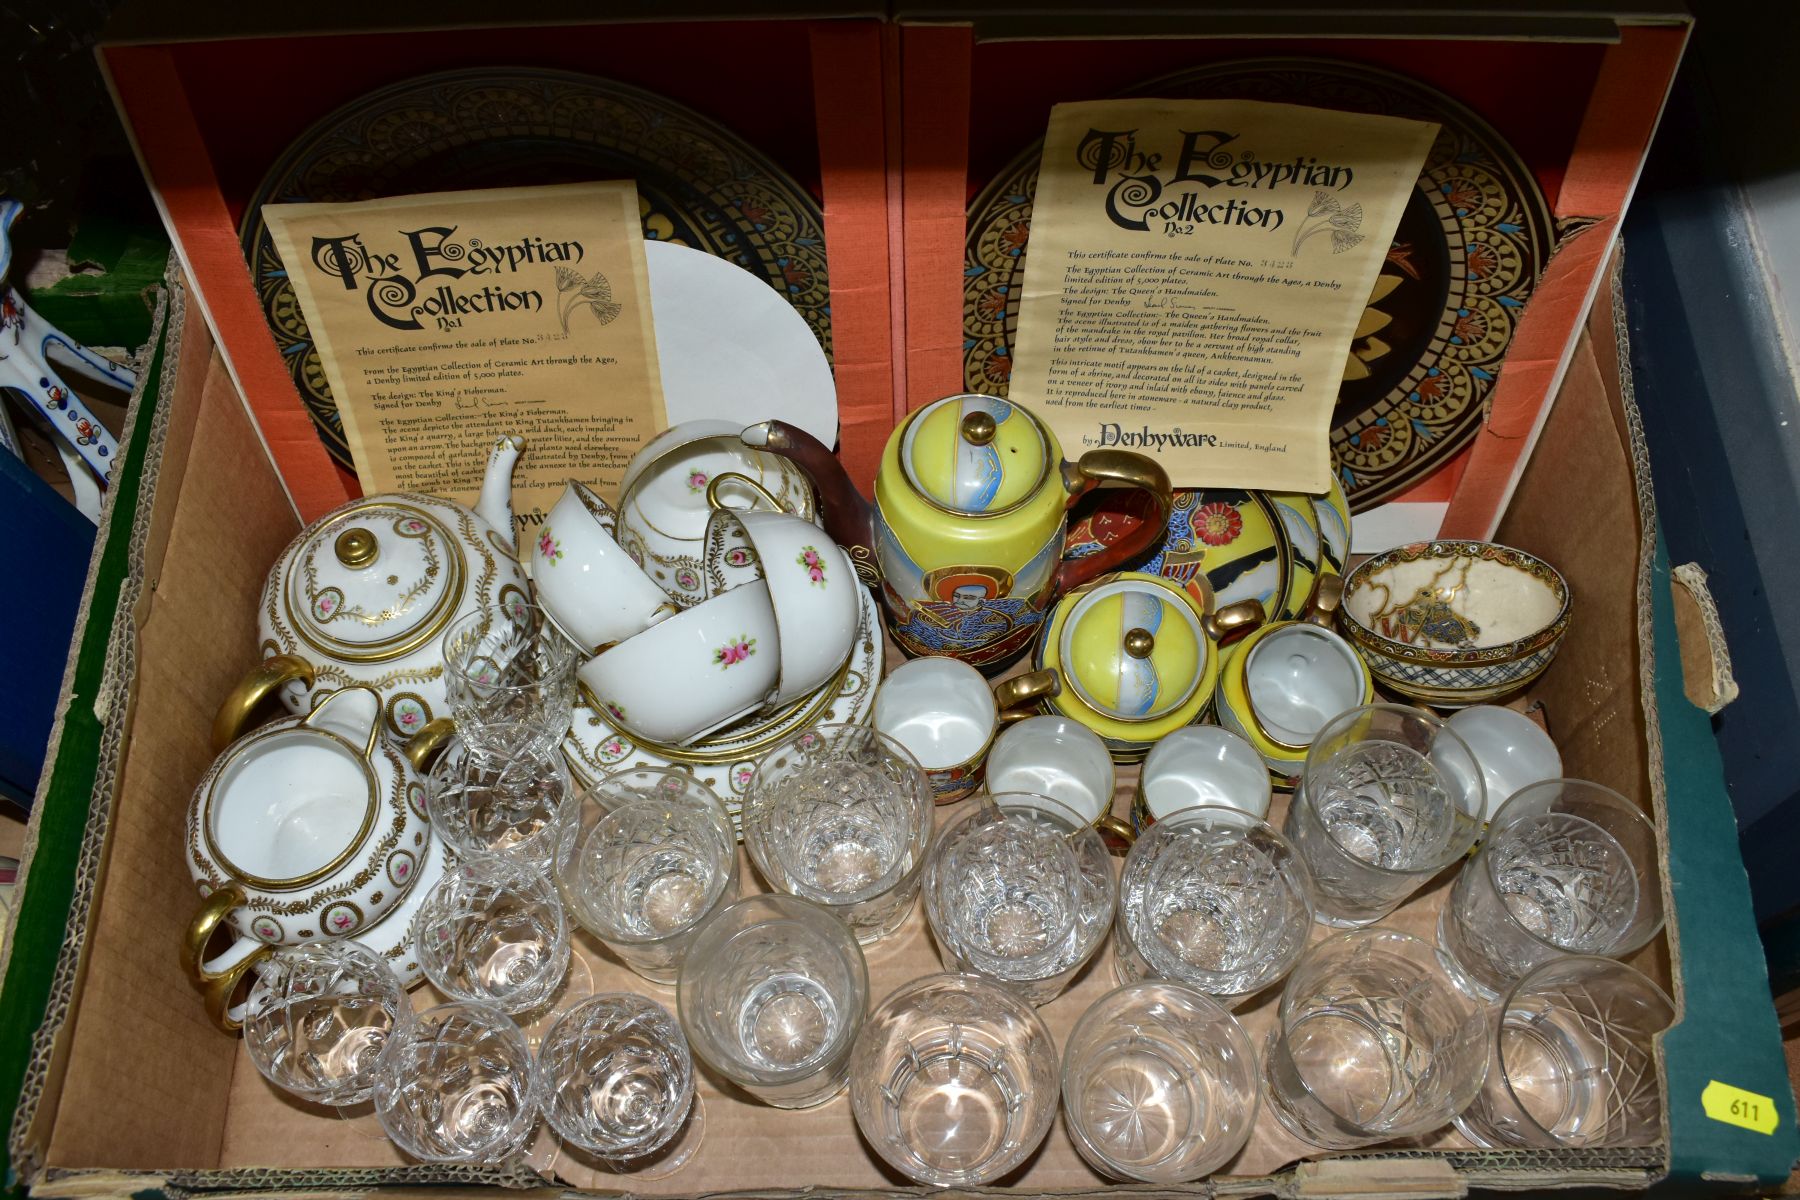 FOUR BOXES OF CERAMICS AND GLASSWARE, including two boxed Denbyware Egyptian collection plates, - Image 8 of 16